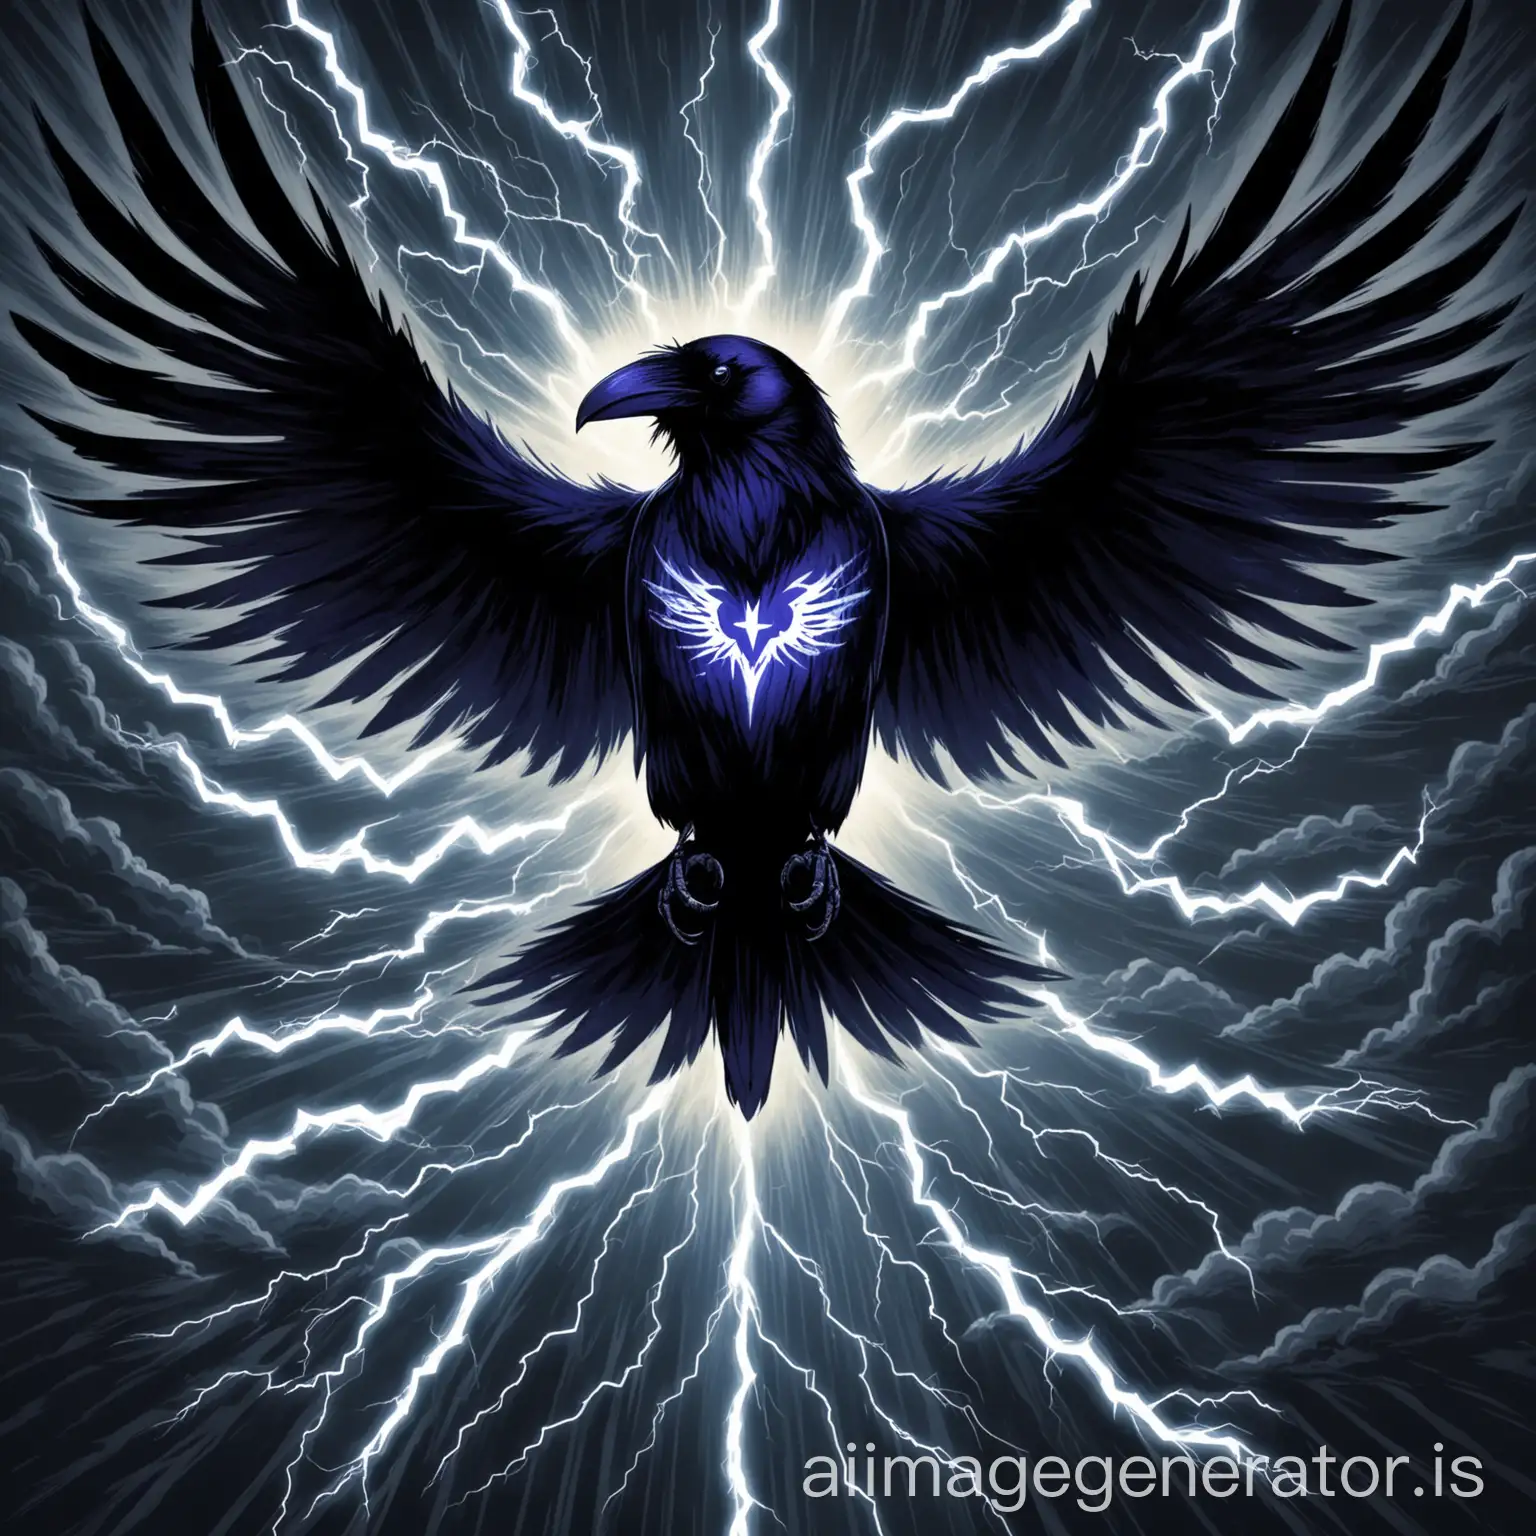 image of an fierce raven with its wings wide open. The raven has a big stylised drawing of a ray of lightning painted across its chest